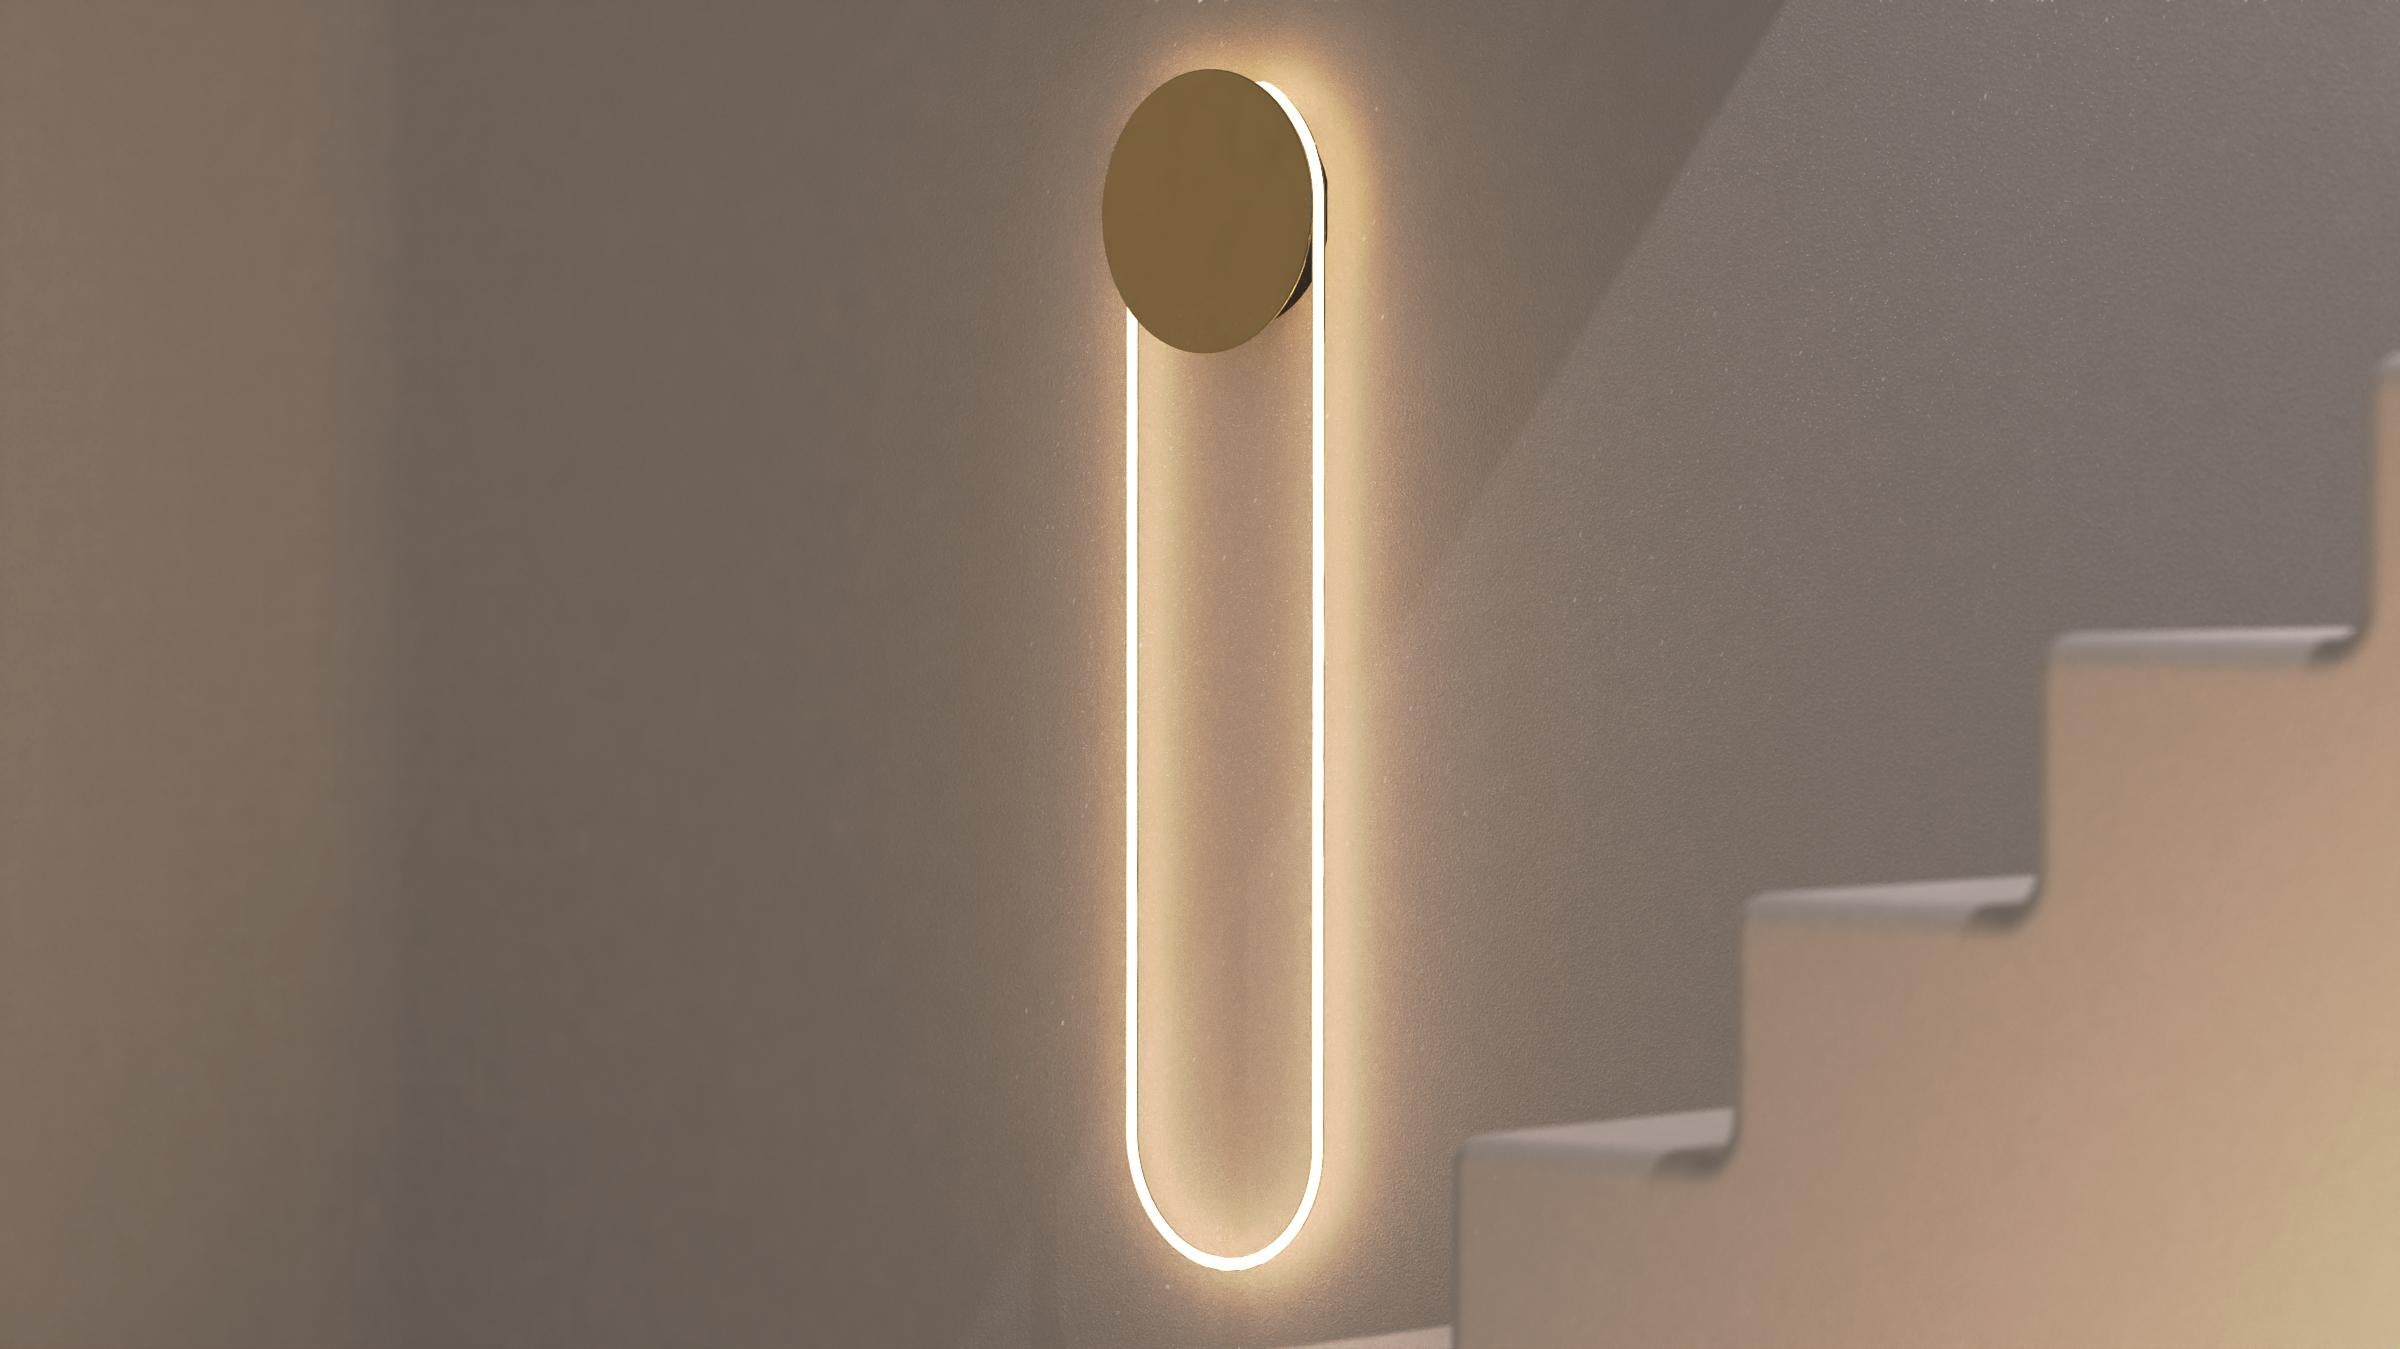 Ra Wall Short Mirror Hand Bent Neon Wall Sconce Lighting by Studio d'armes For Sale 2